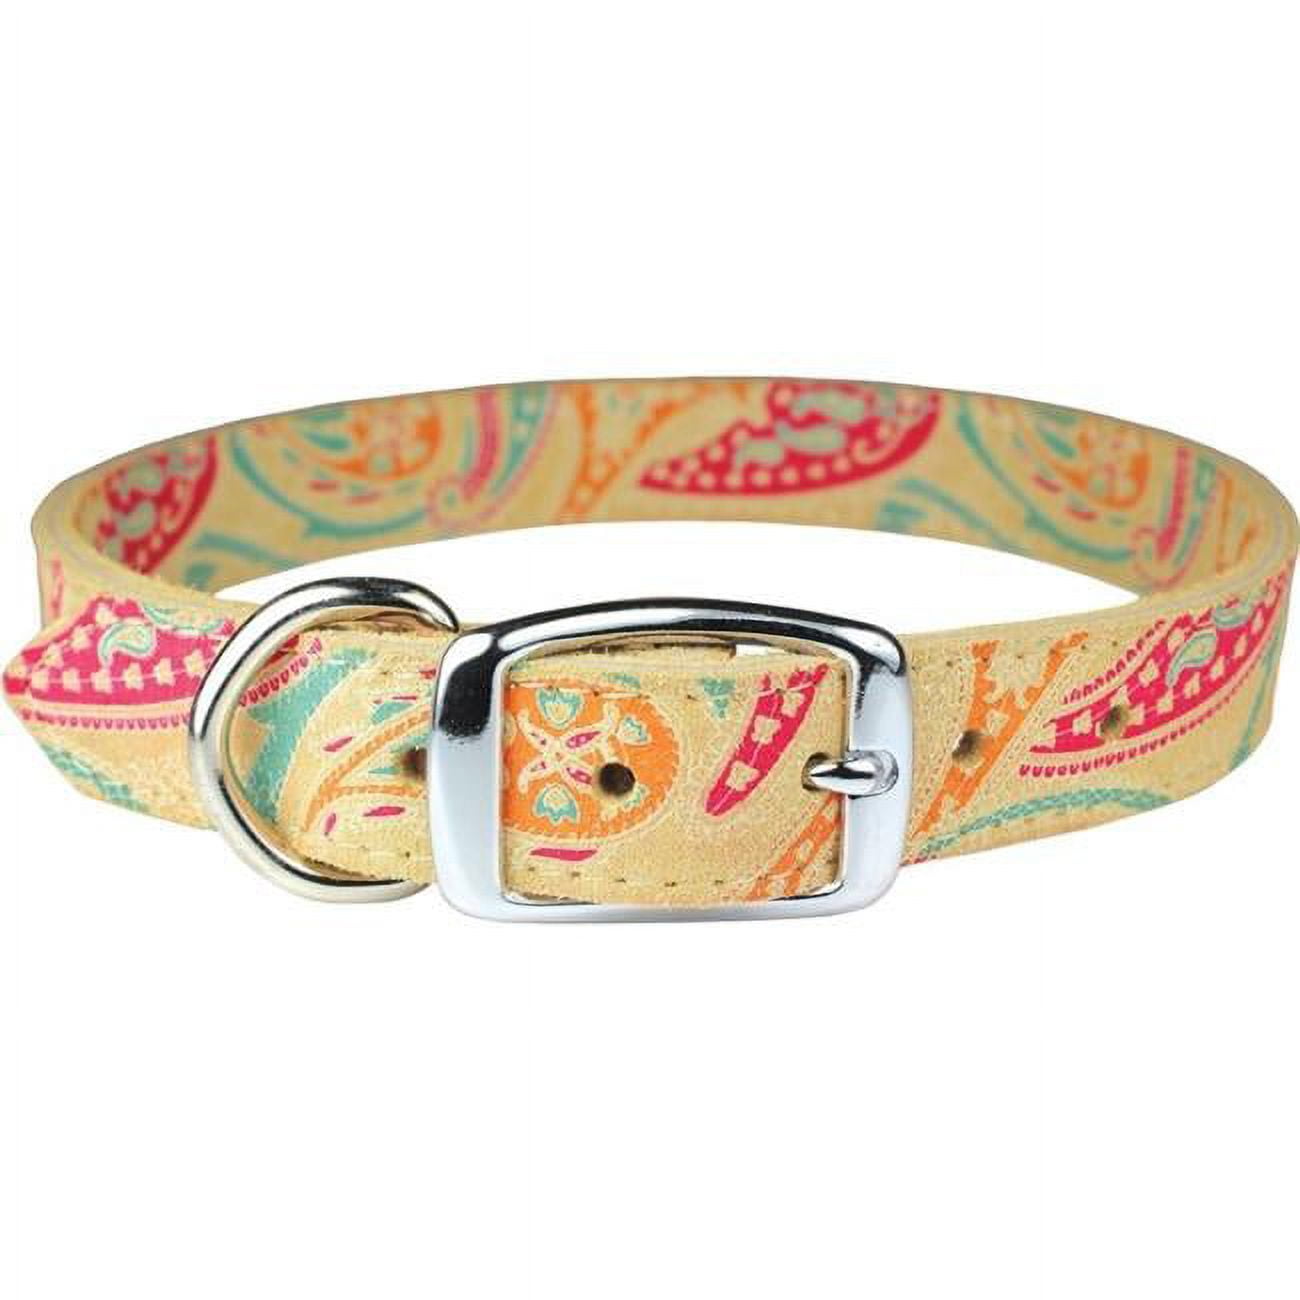 UPC 024764604311 product image for Leather Brothers 6247-SD18 0.75 x 18 in. Paisley Dog Collar, Sand | upcitemdb.com